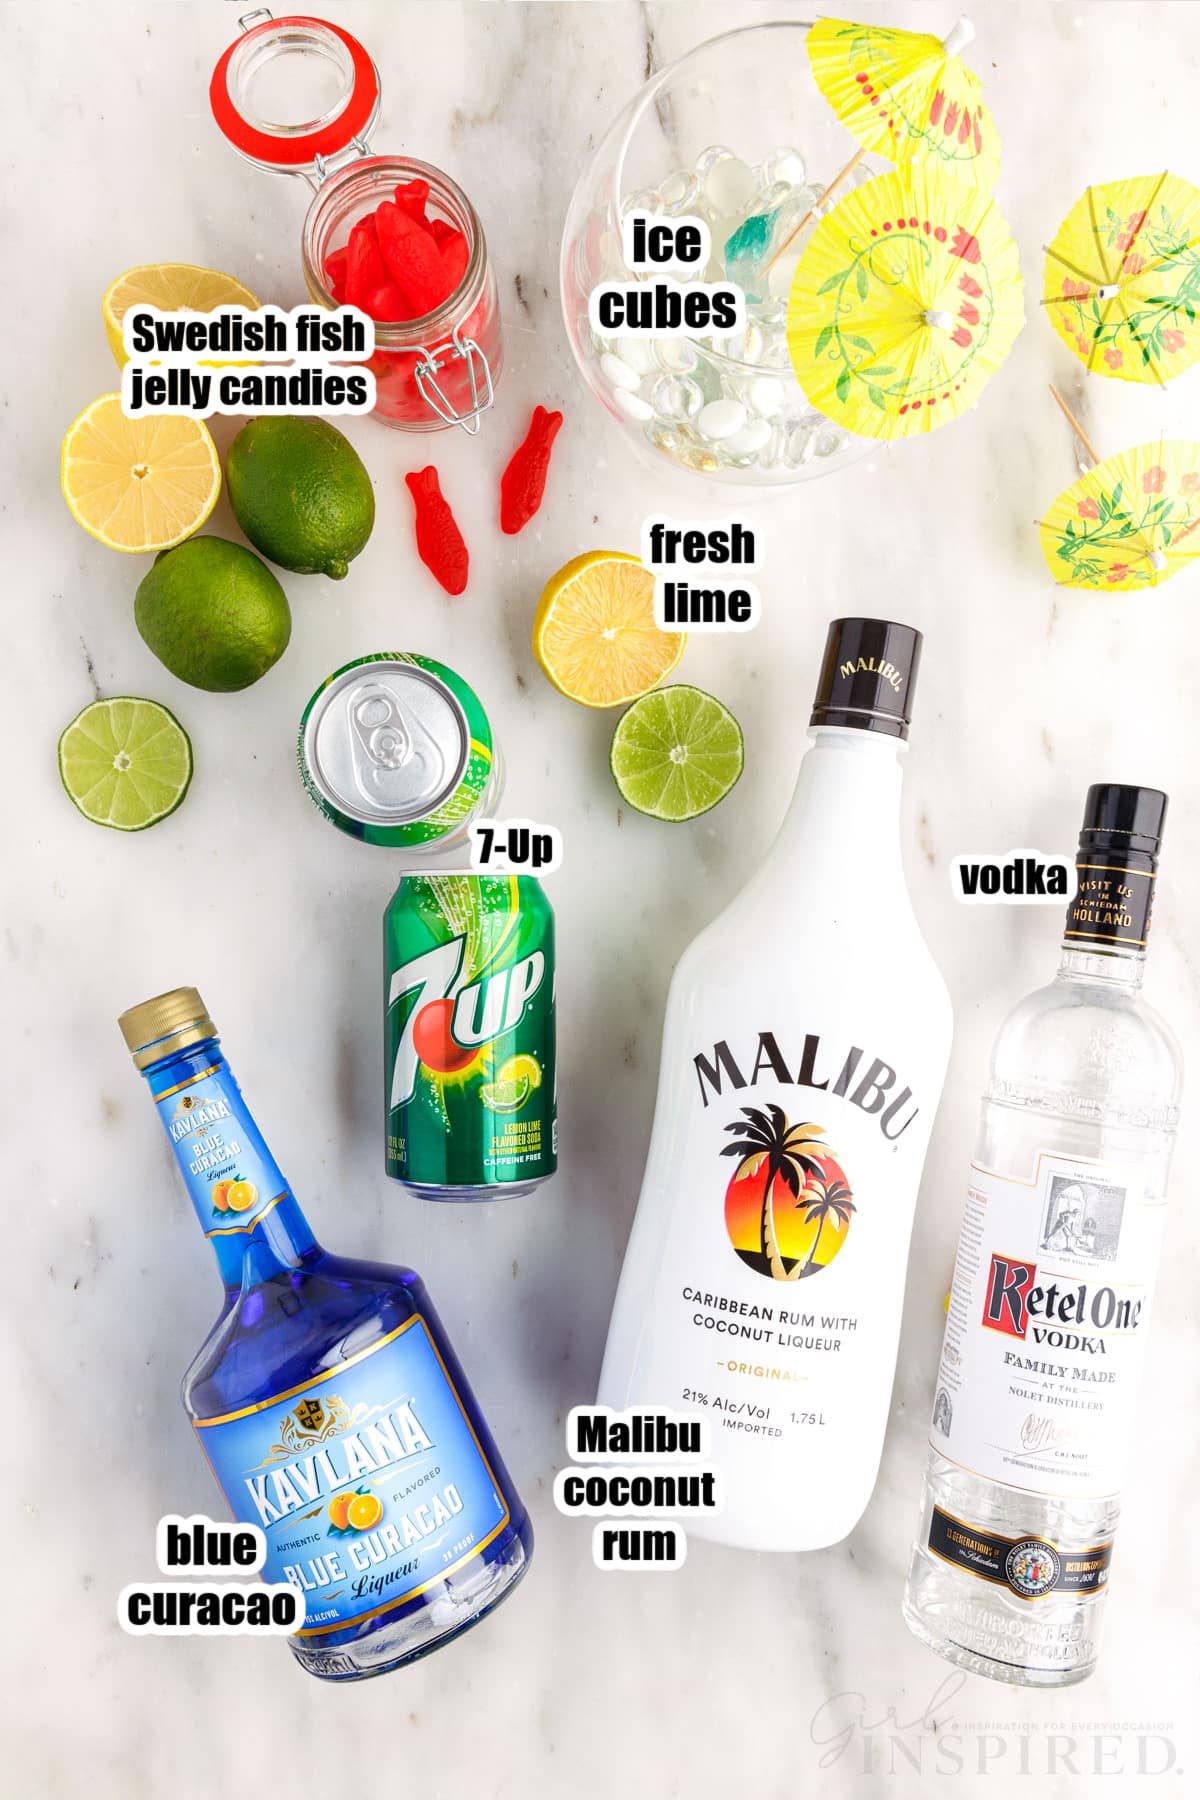 Individual ingredients for fish bowl drink - bottles of liquor, 7-Up, lemonds and limes, and Swedish fish, with text labels.